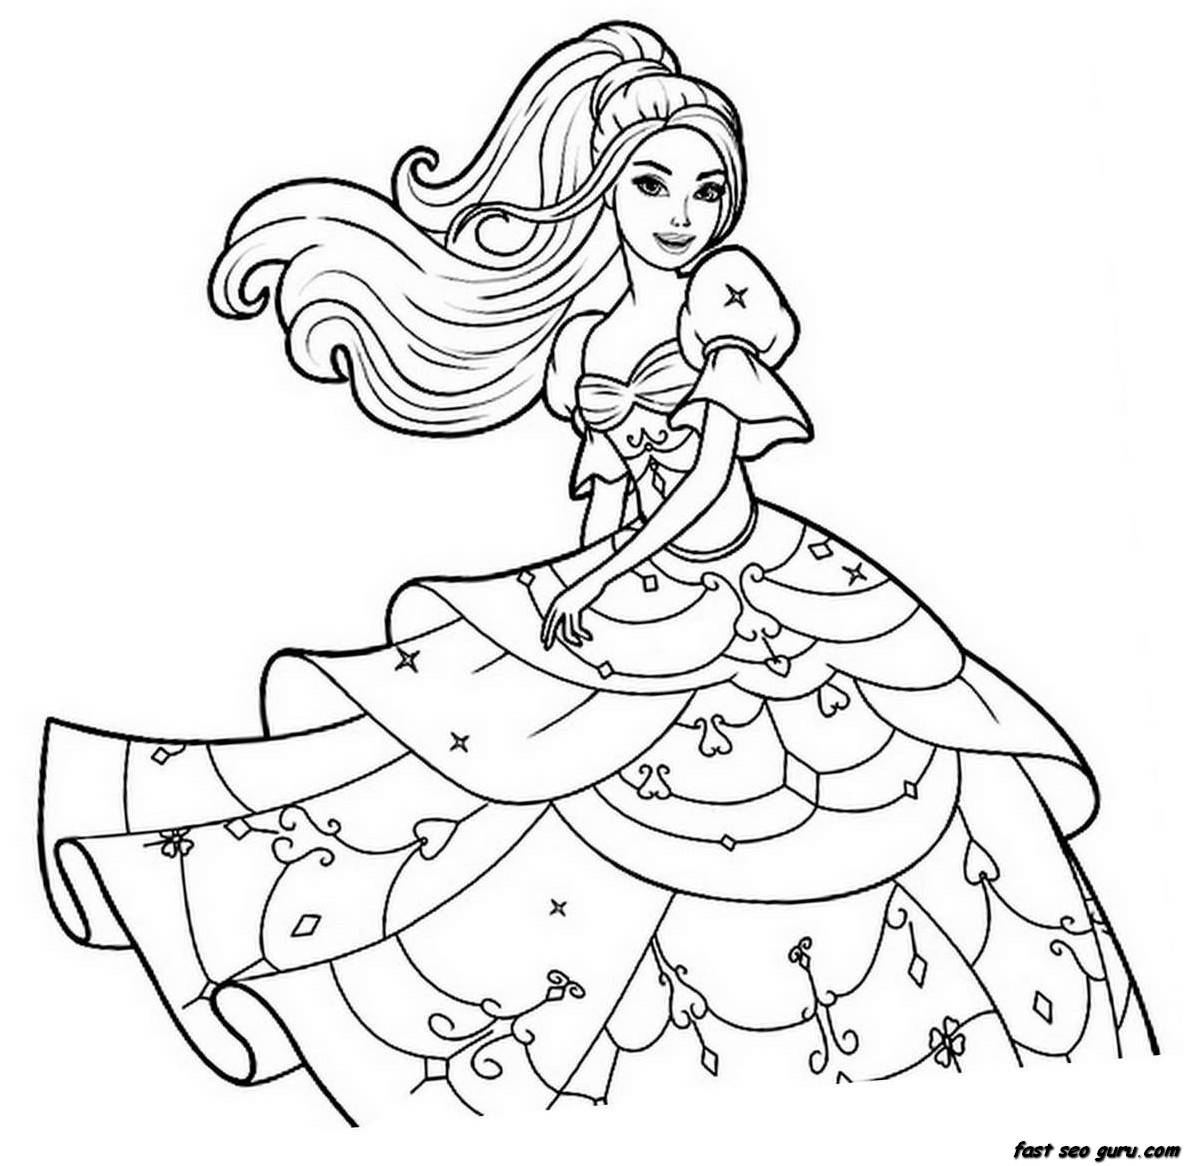 Pin Coloring Pages For Girls Only